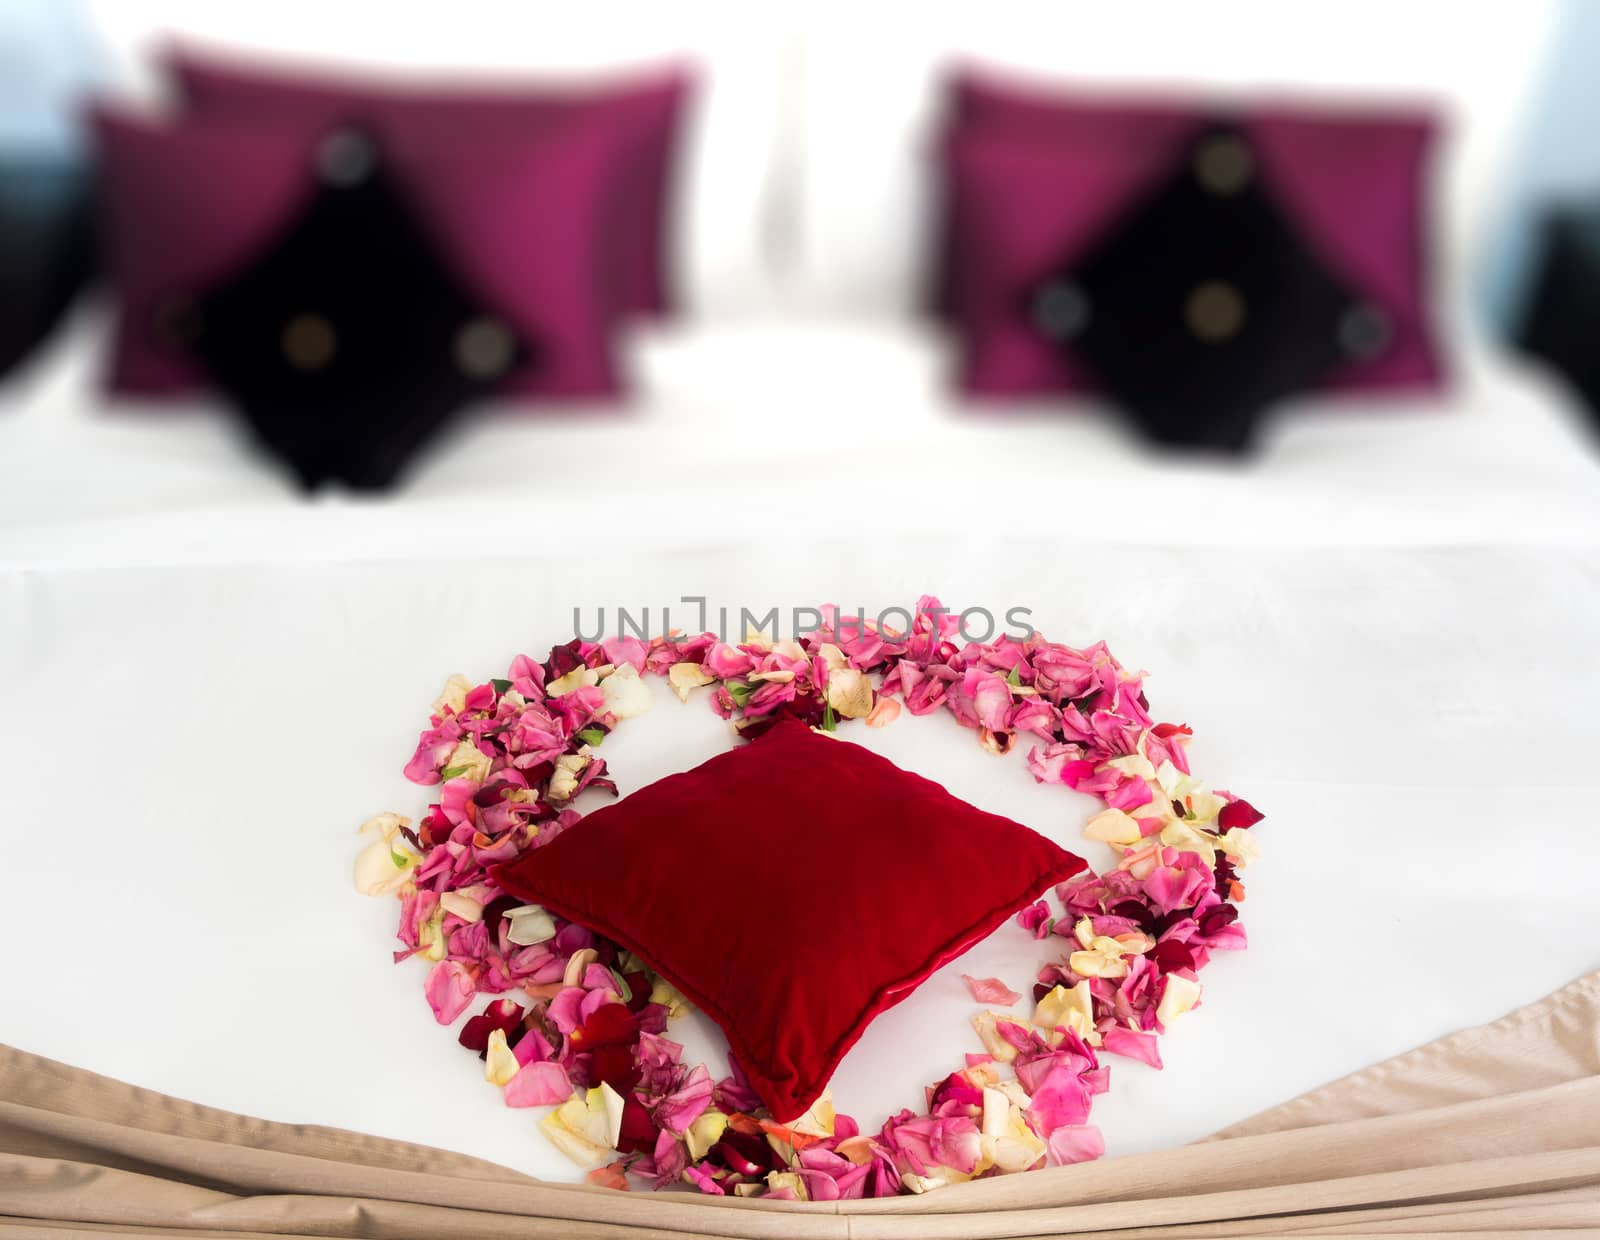 Heart of rose petals on a romantic bed